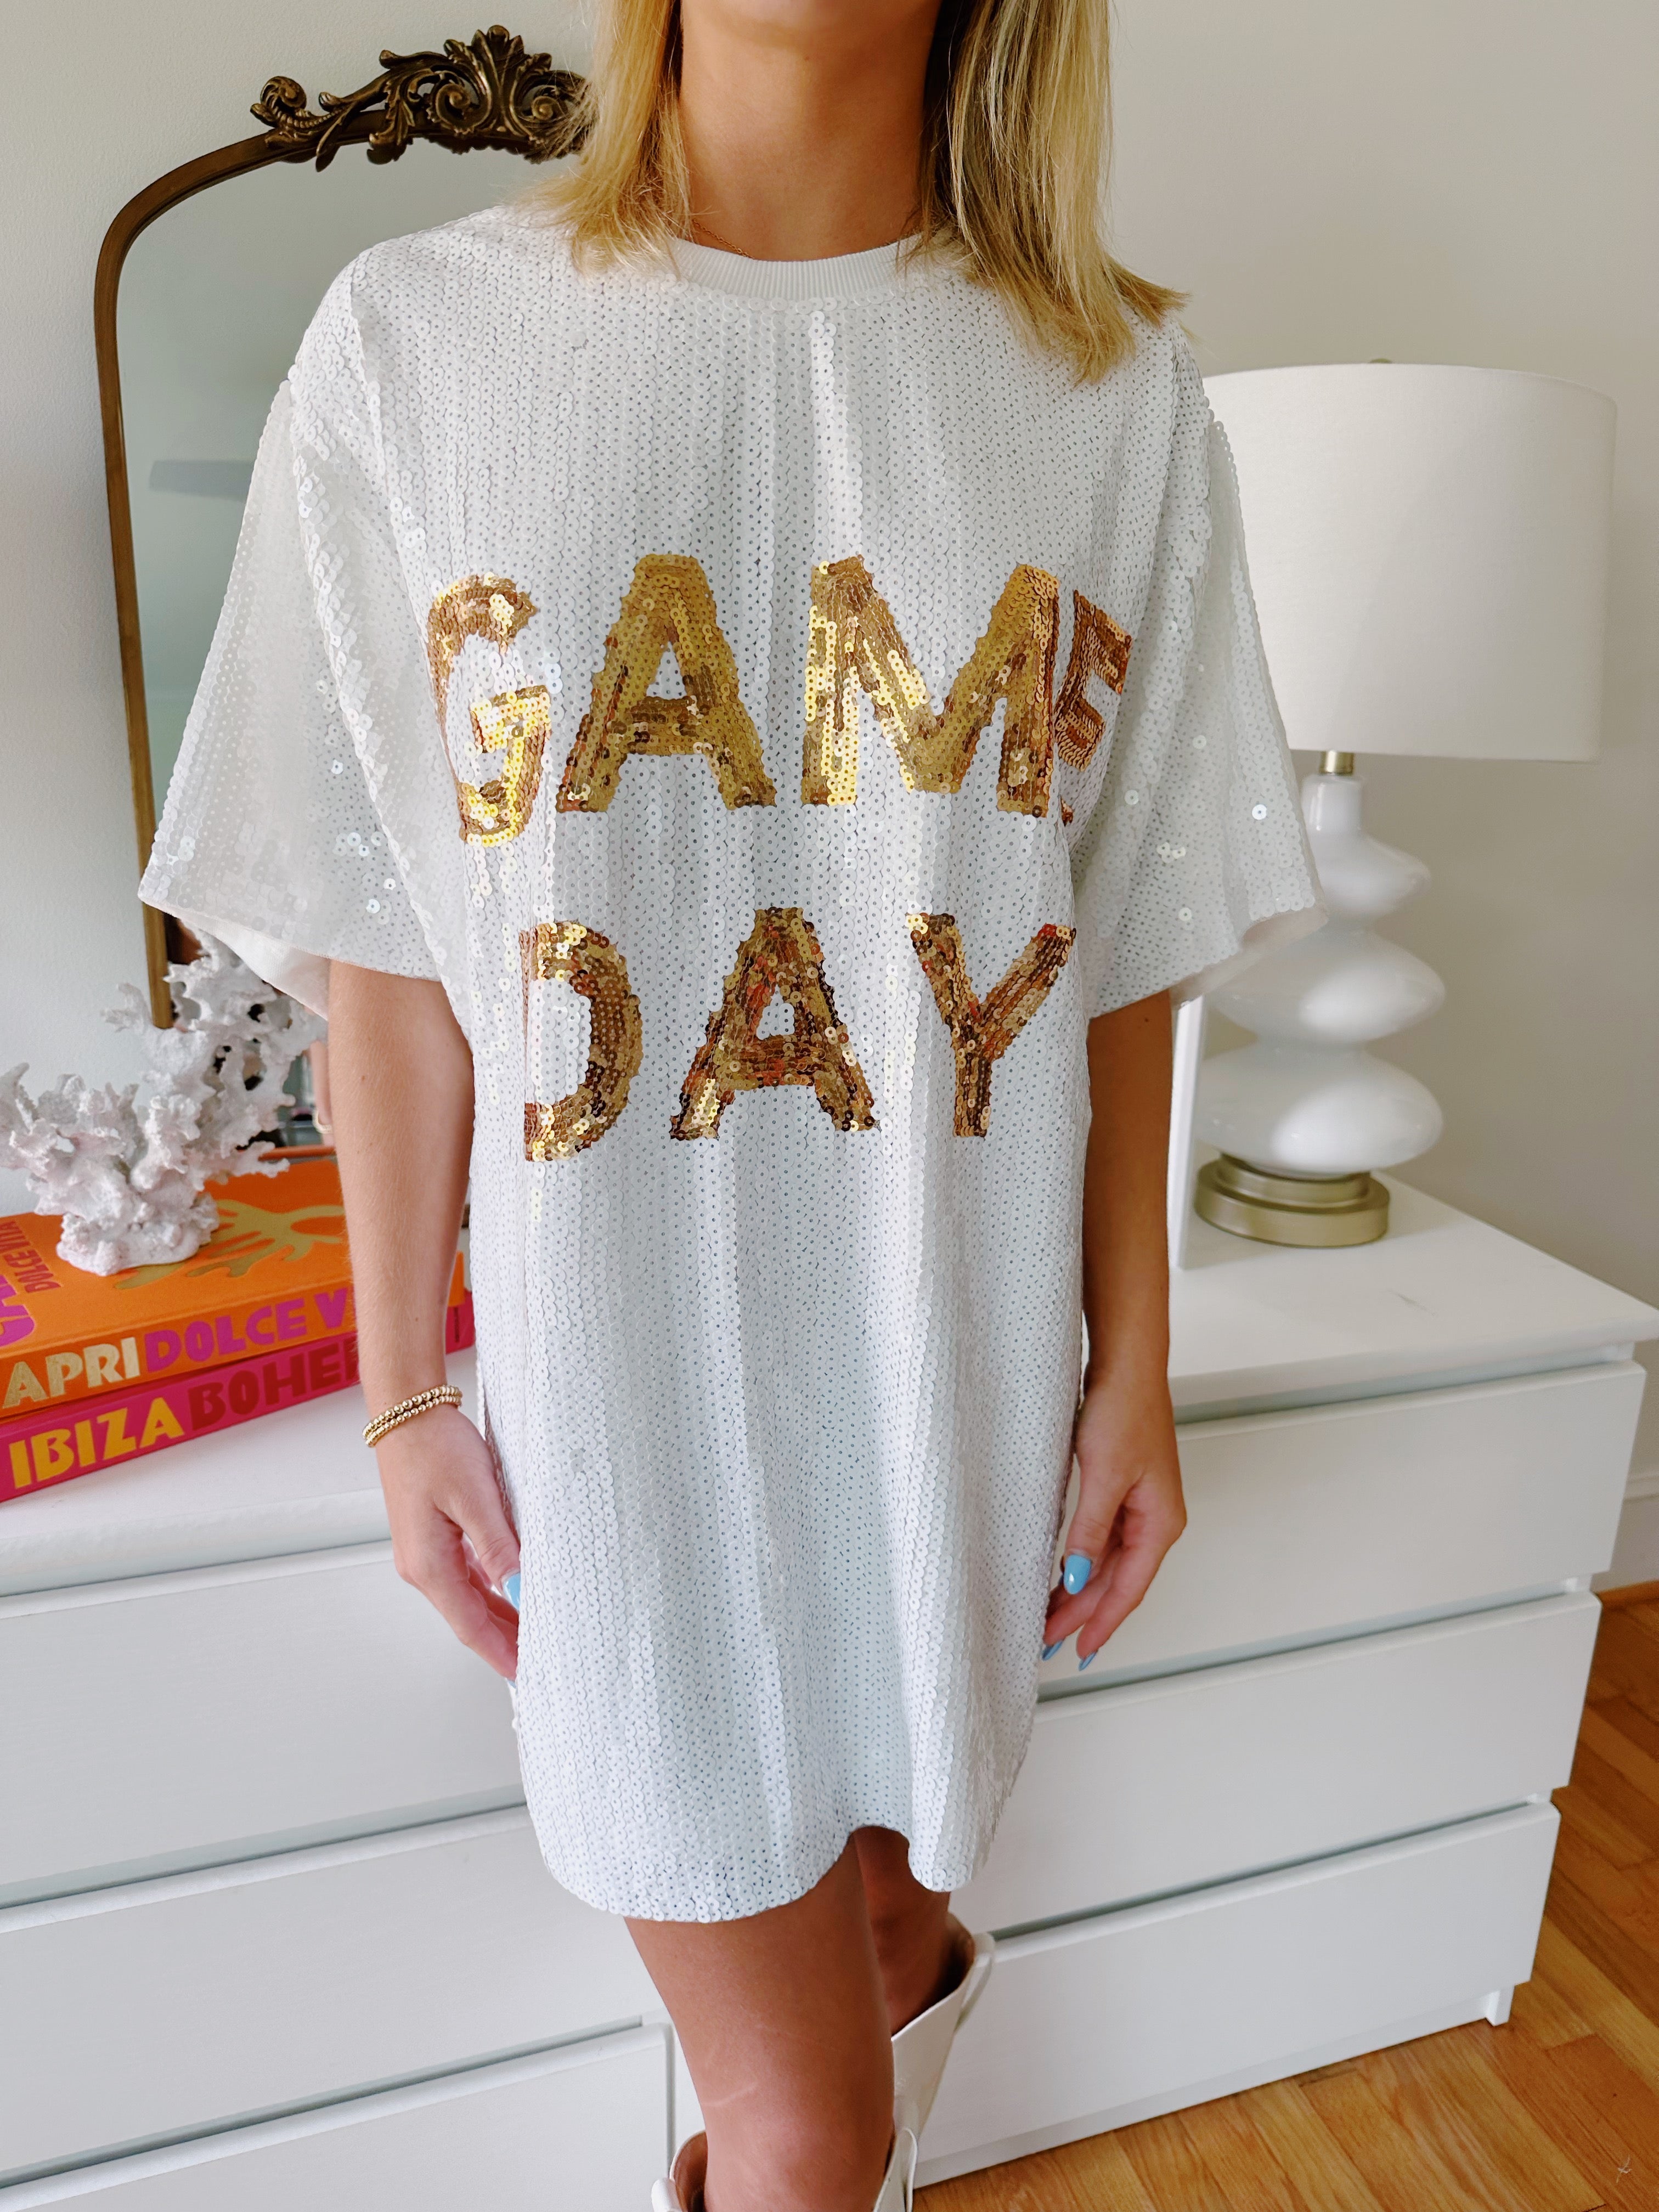 Game Day Dress - White & Gold Sequin